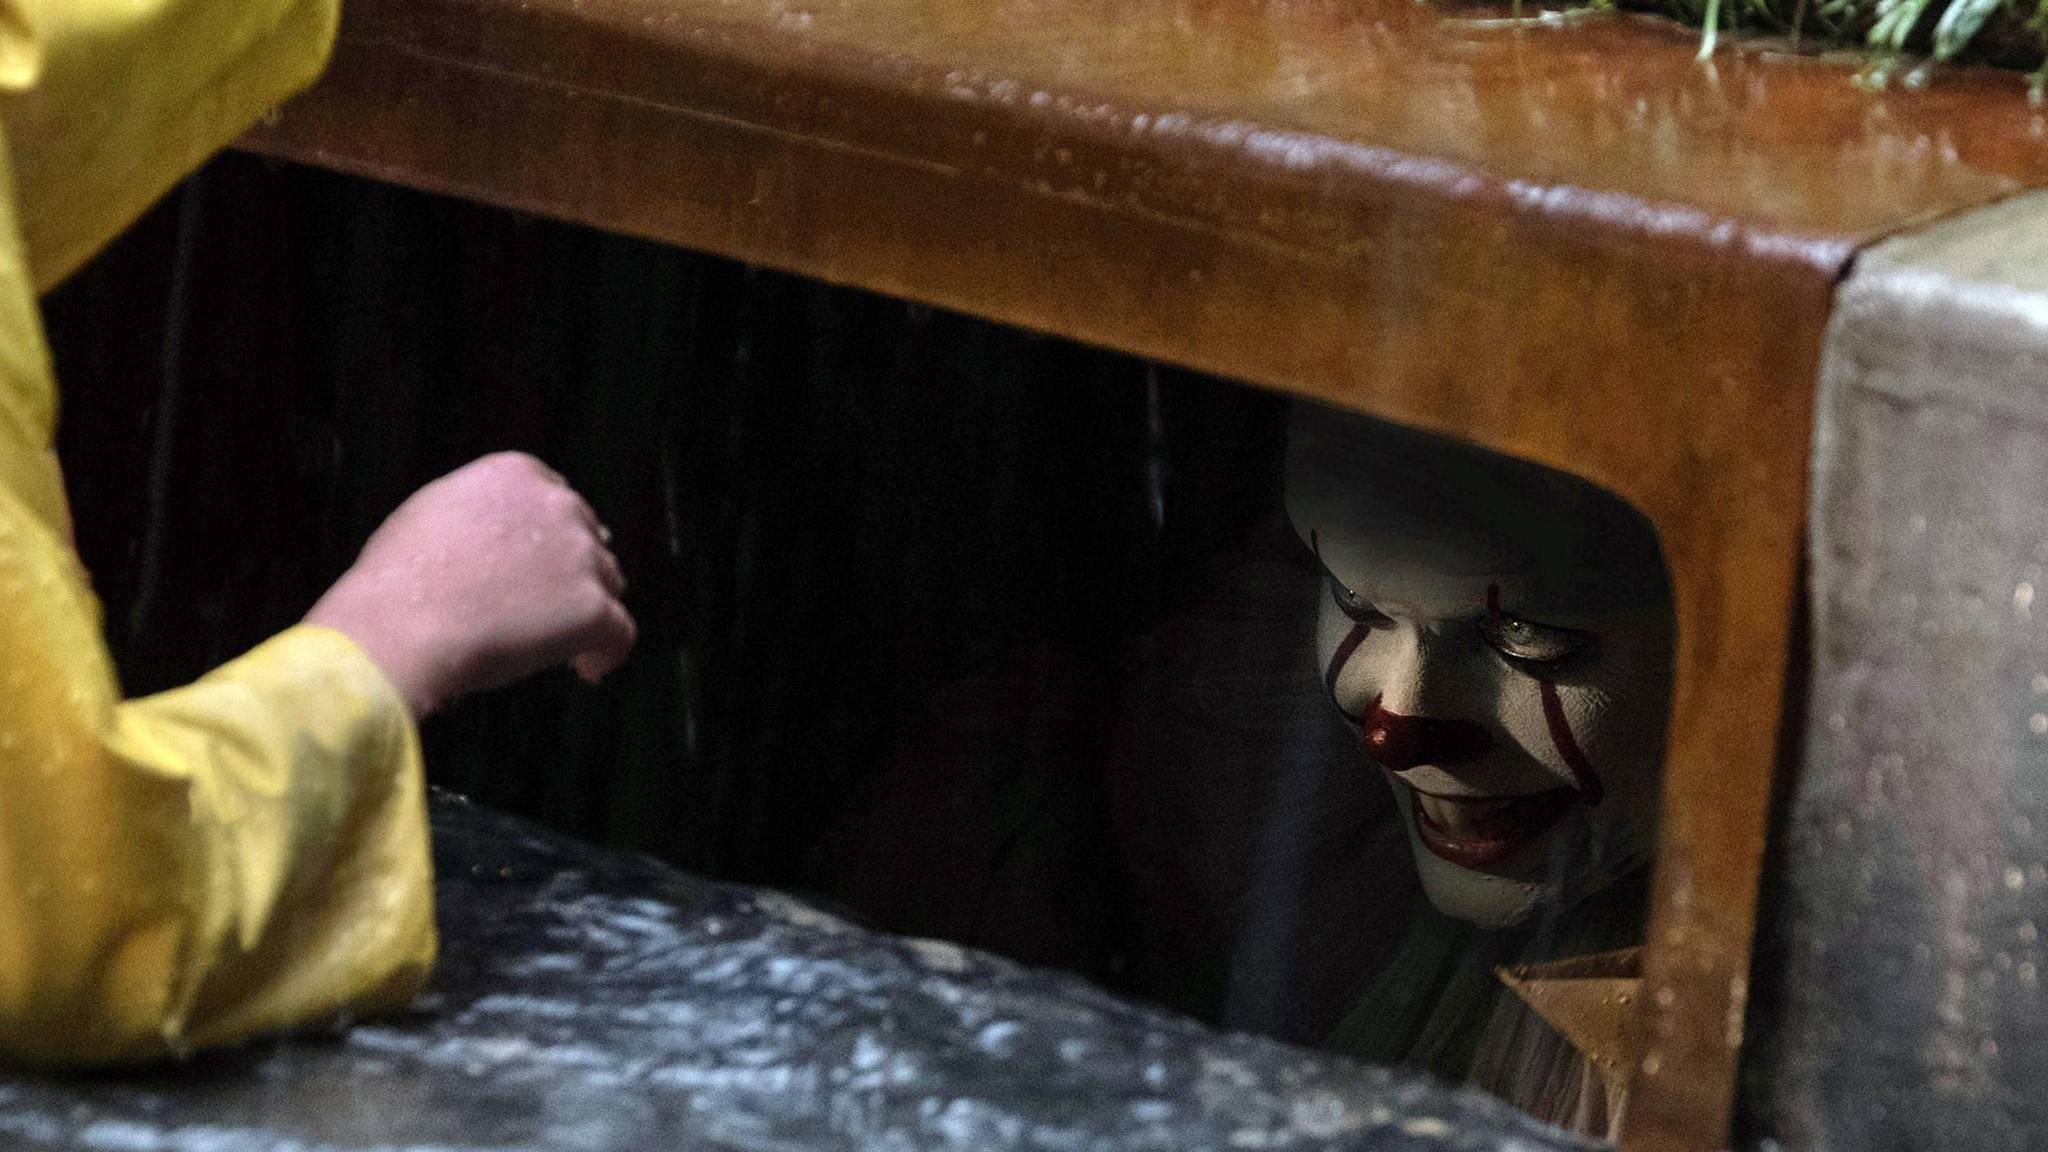 How to have pennywise in the sewer for halloween | gail's blog